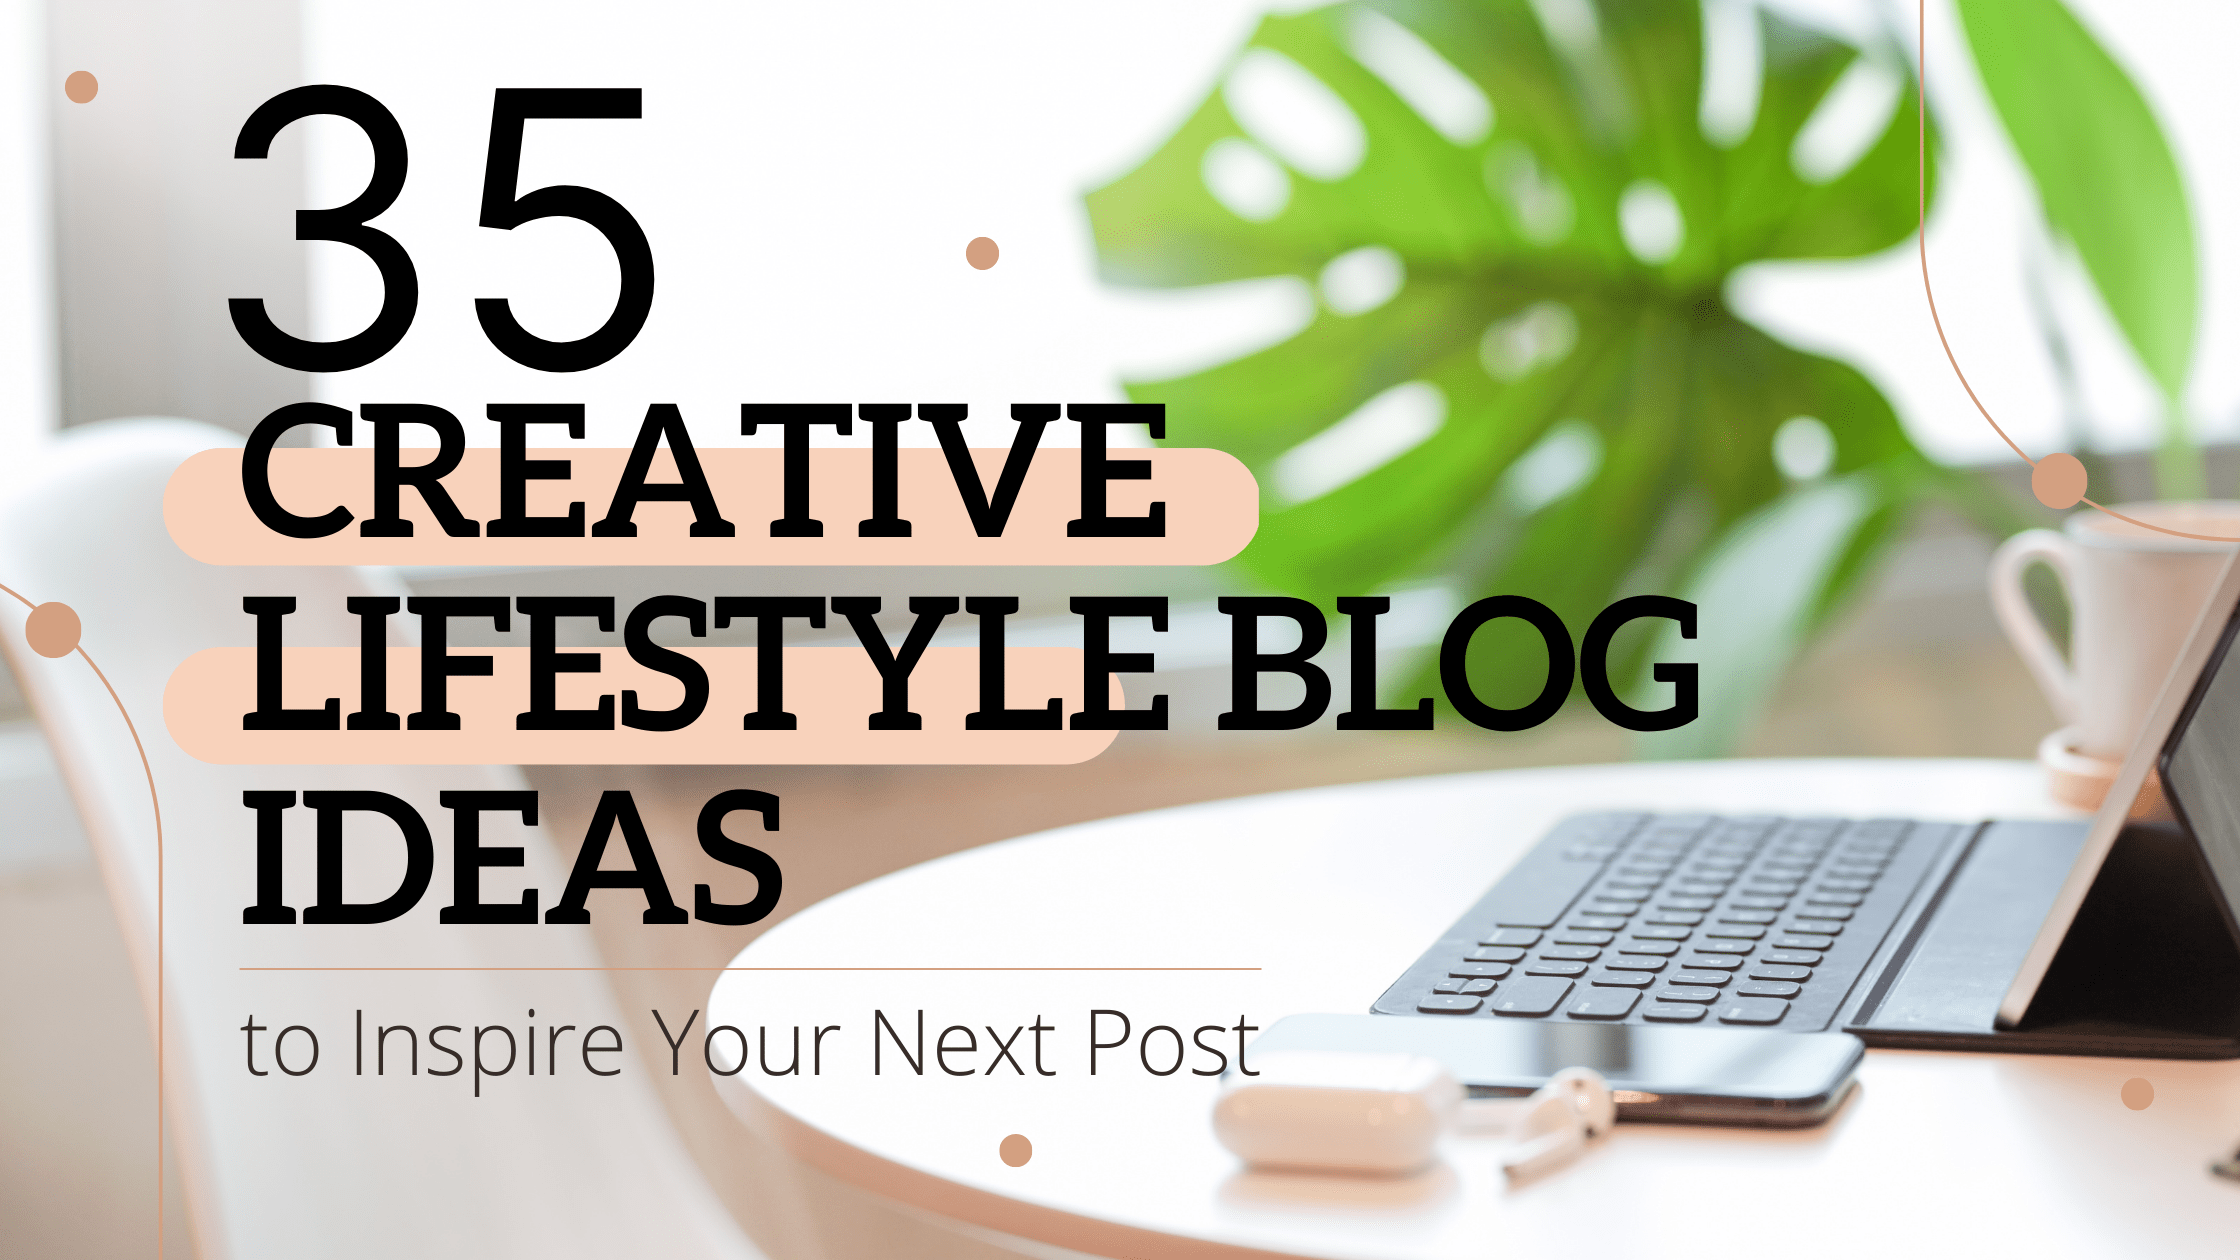 35 Creative Lifestyle Blog Ideas to Inspire Your Next Post